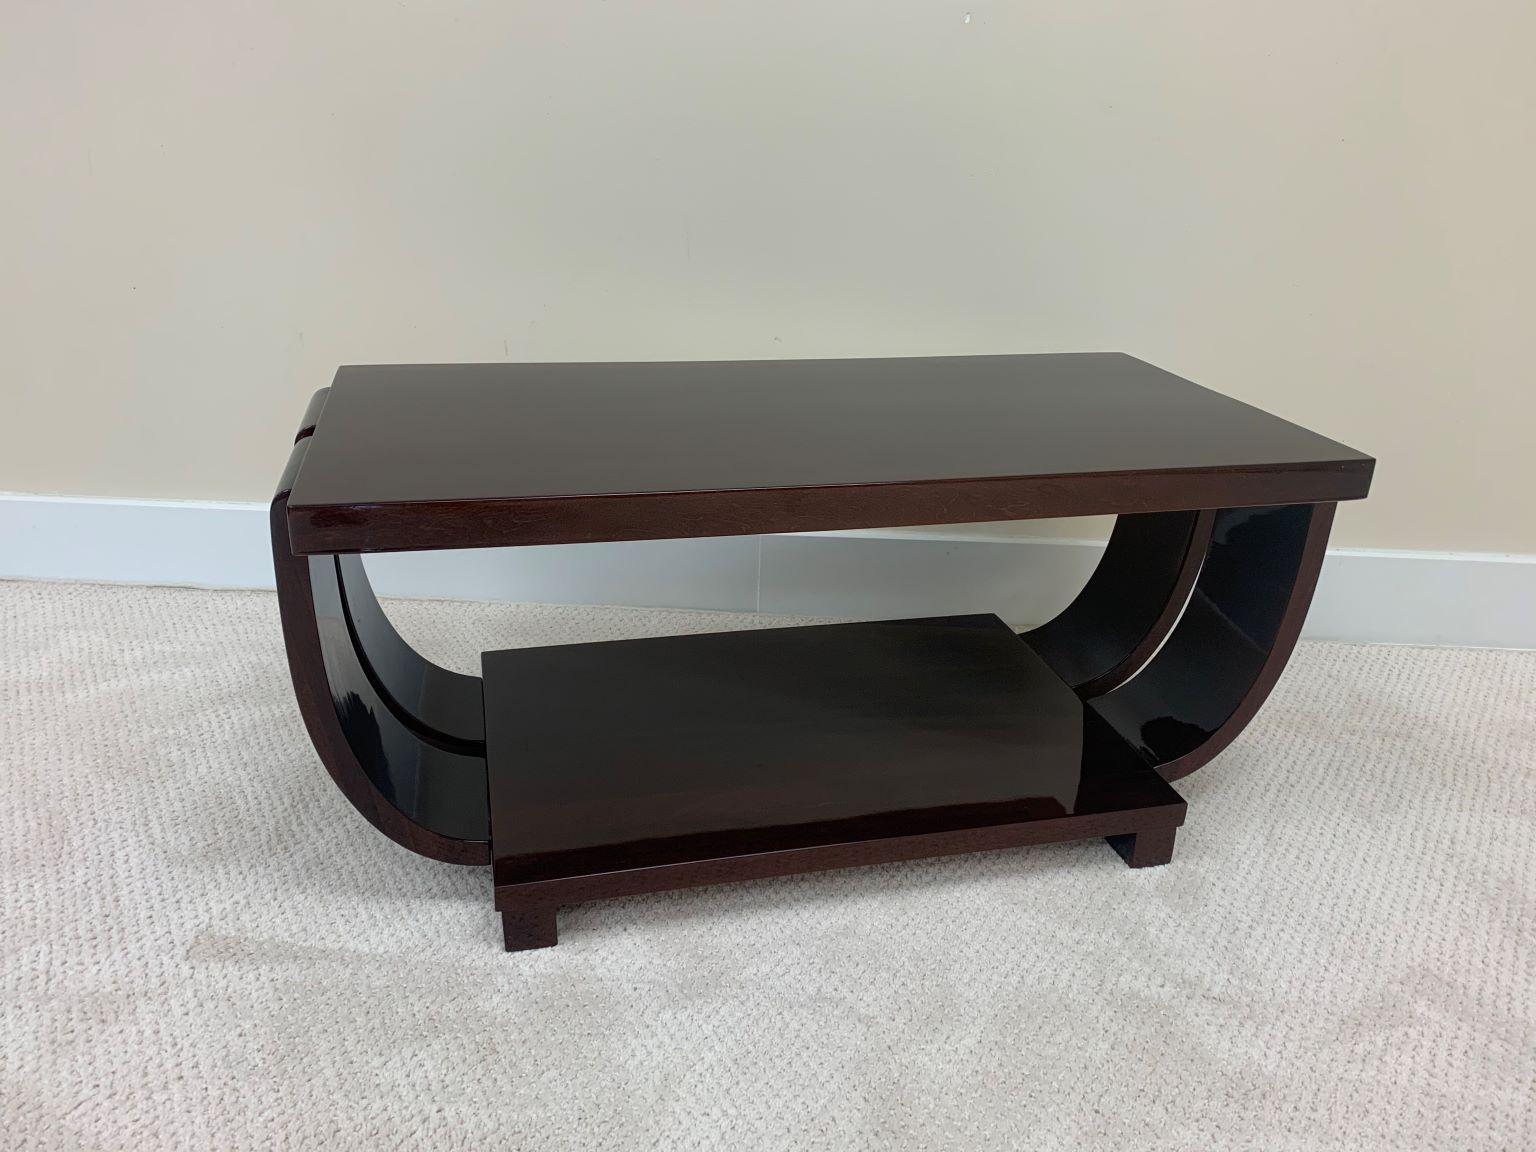 Maple Art Deco Cocktail Table by Modern Age Furniture Company Attr. Brown Saltman